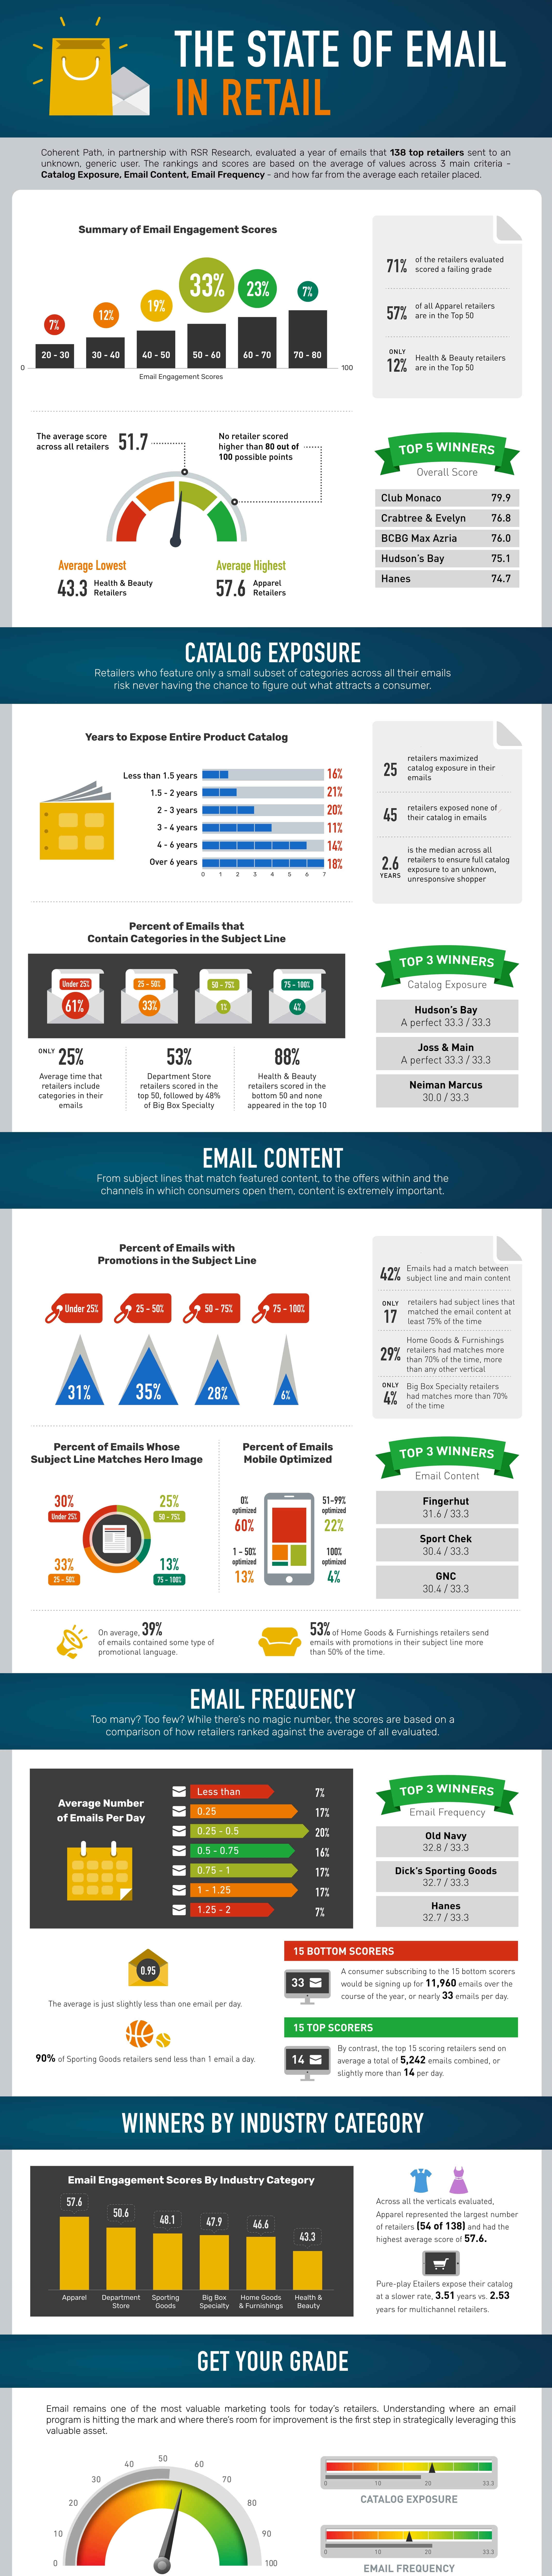 The State of Email in Retail [Infographic]